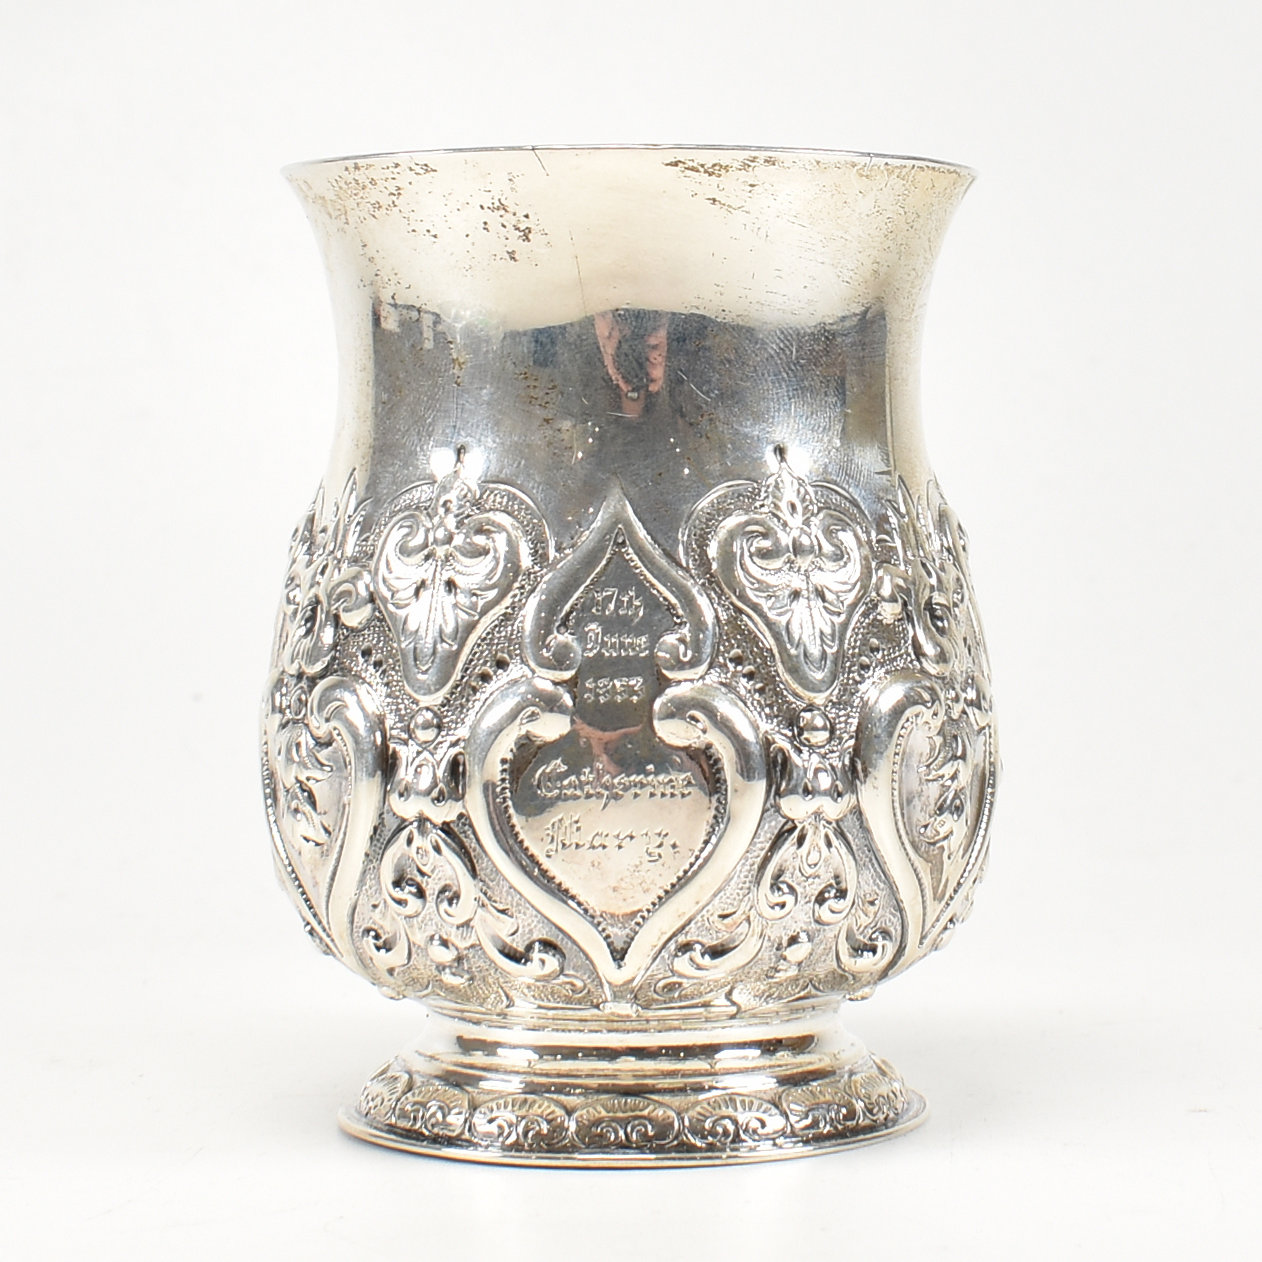 VICTORIAN HALLMARKED SILVER CHRISTENING CUP - Image 7 of 9